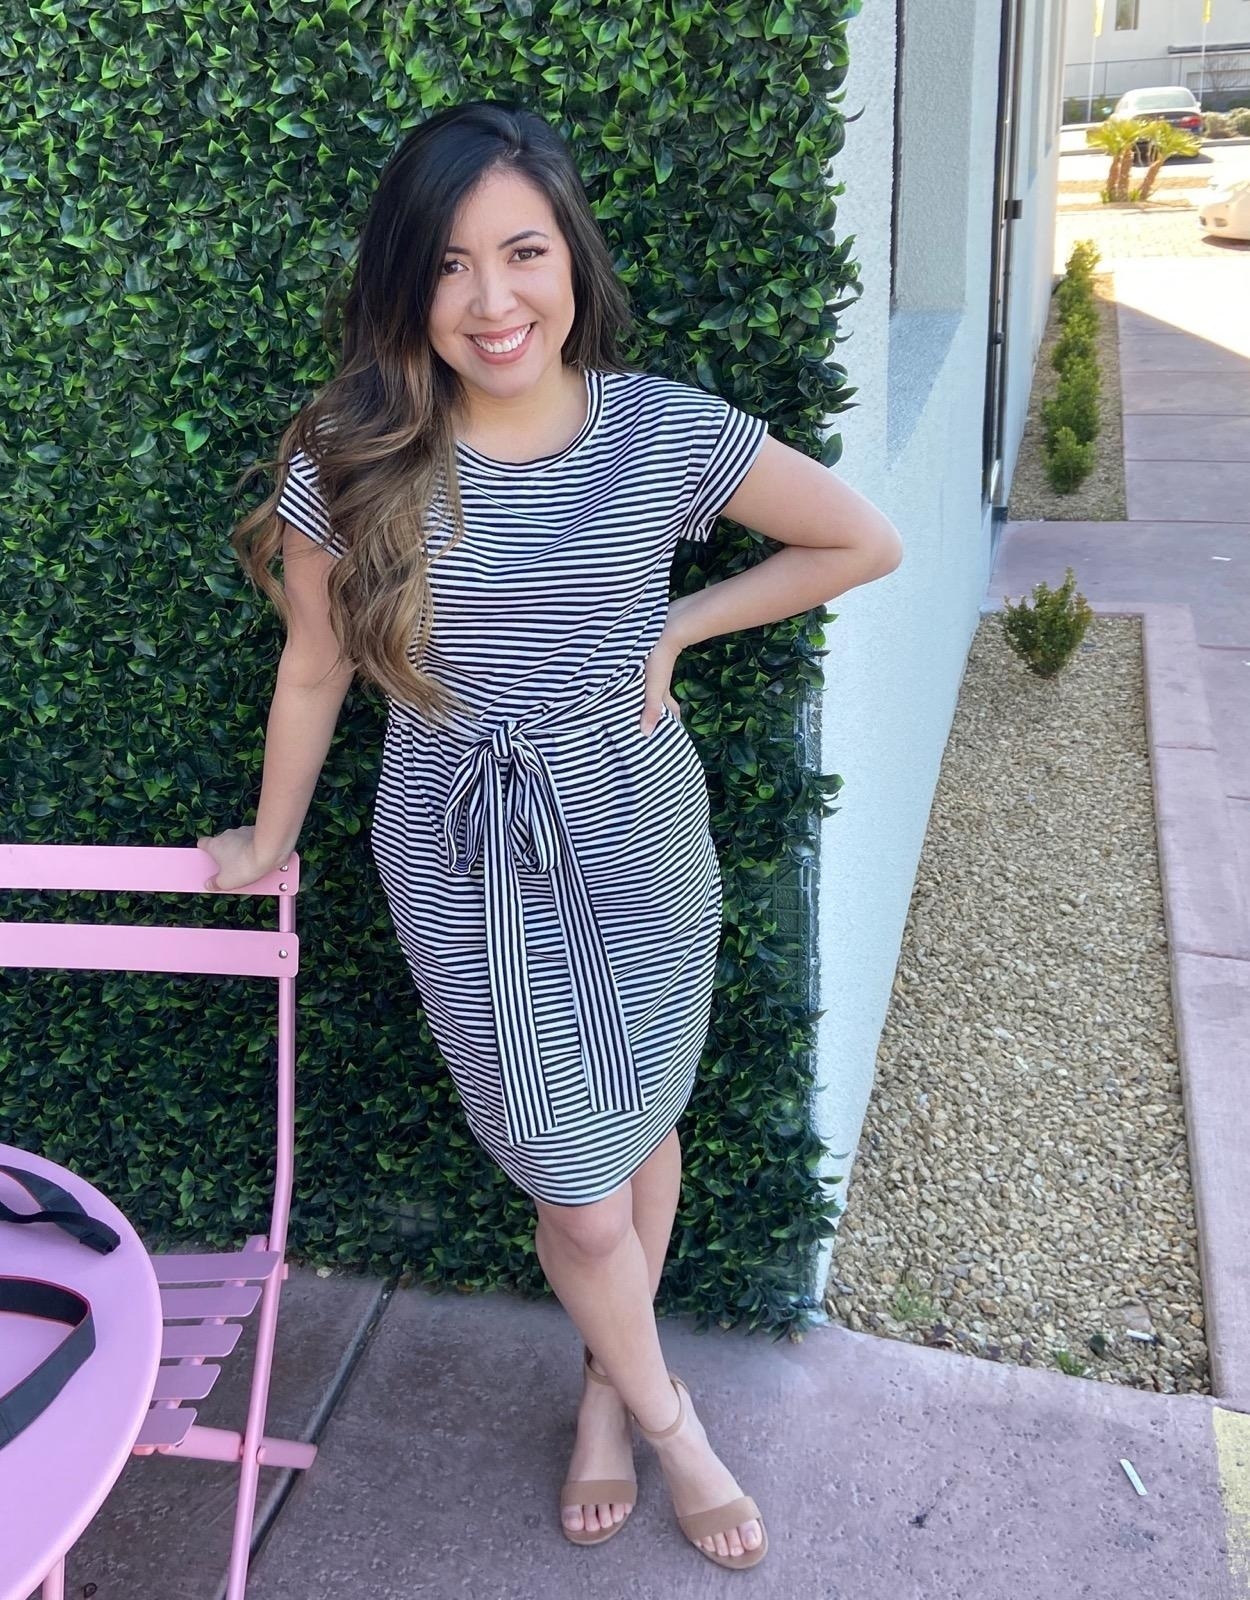 A reviewer in the striped dress